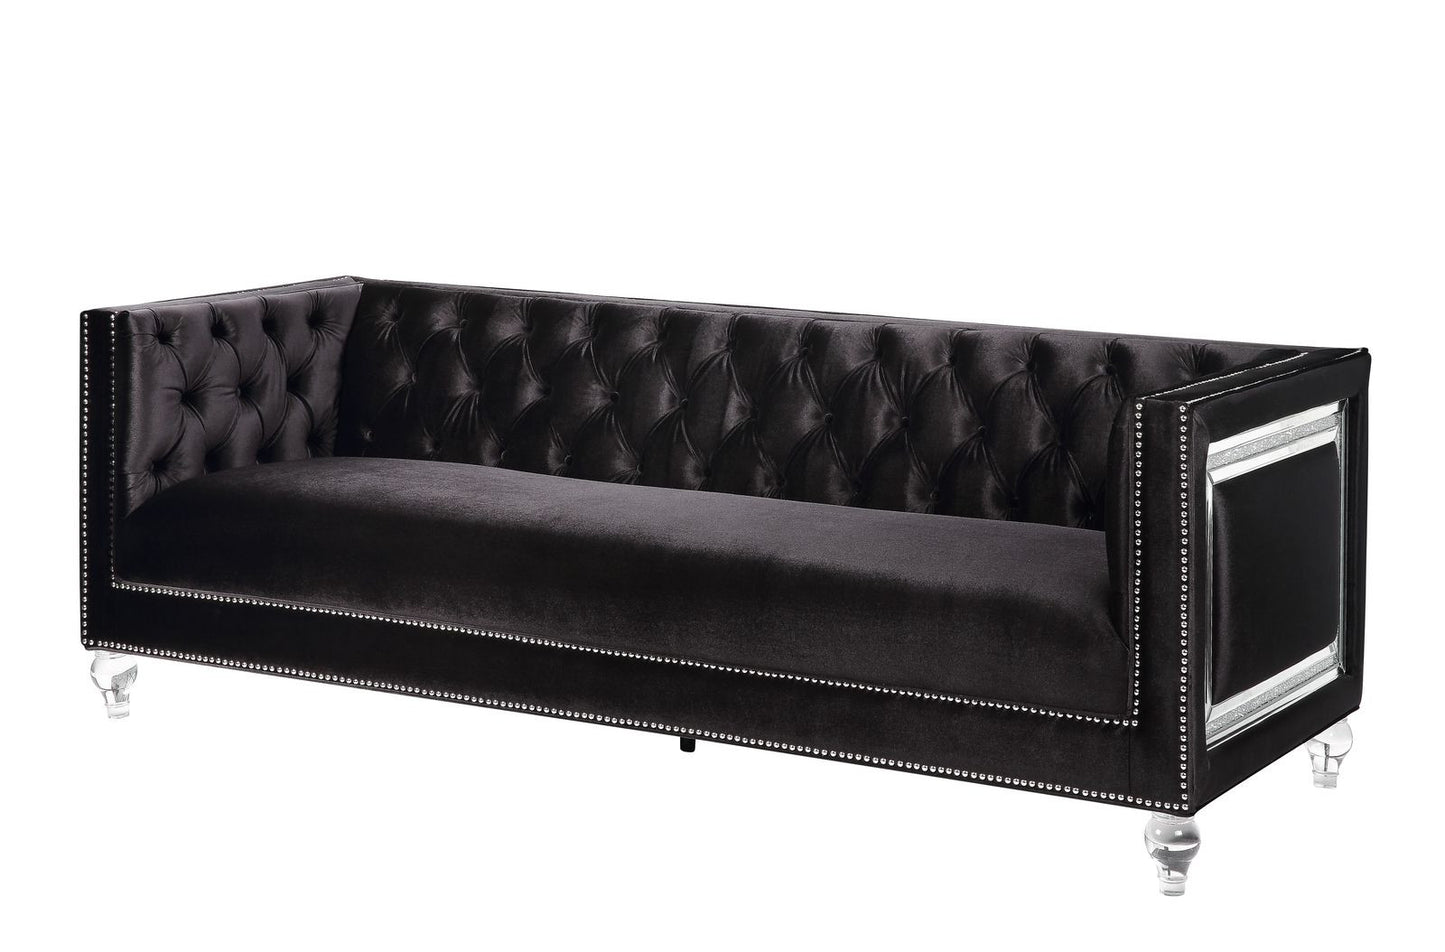 89" Black Velvet Sofa With Two Toss Pillows By Homeroots